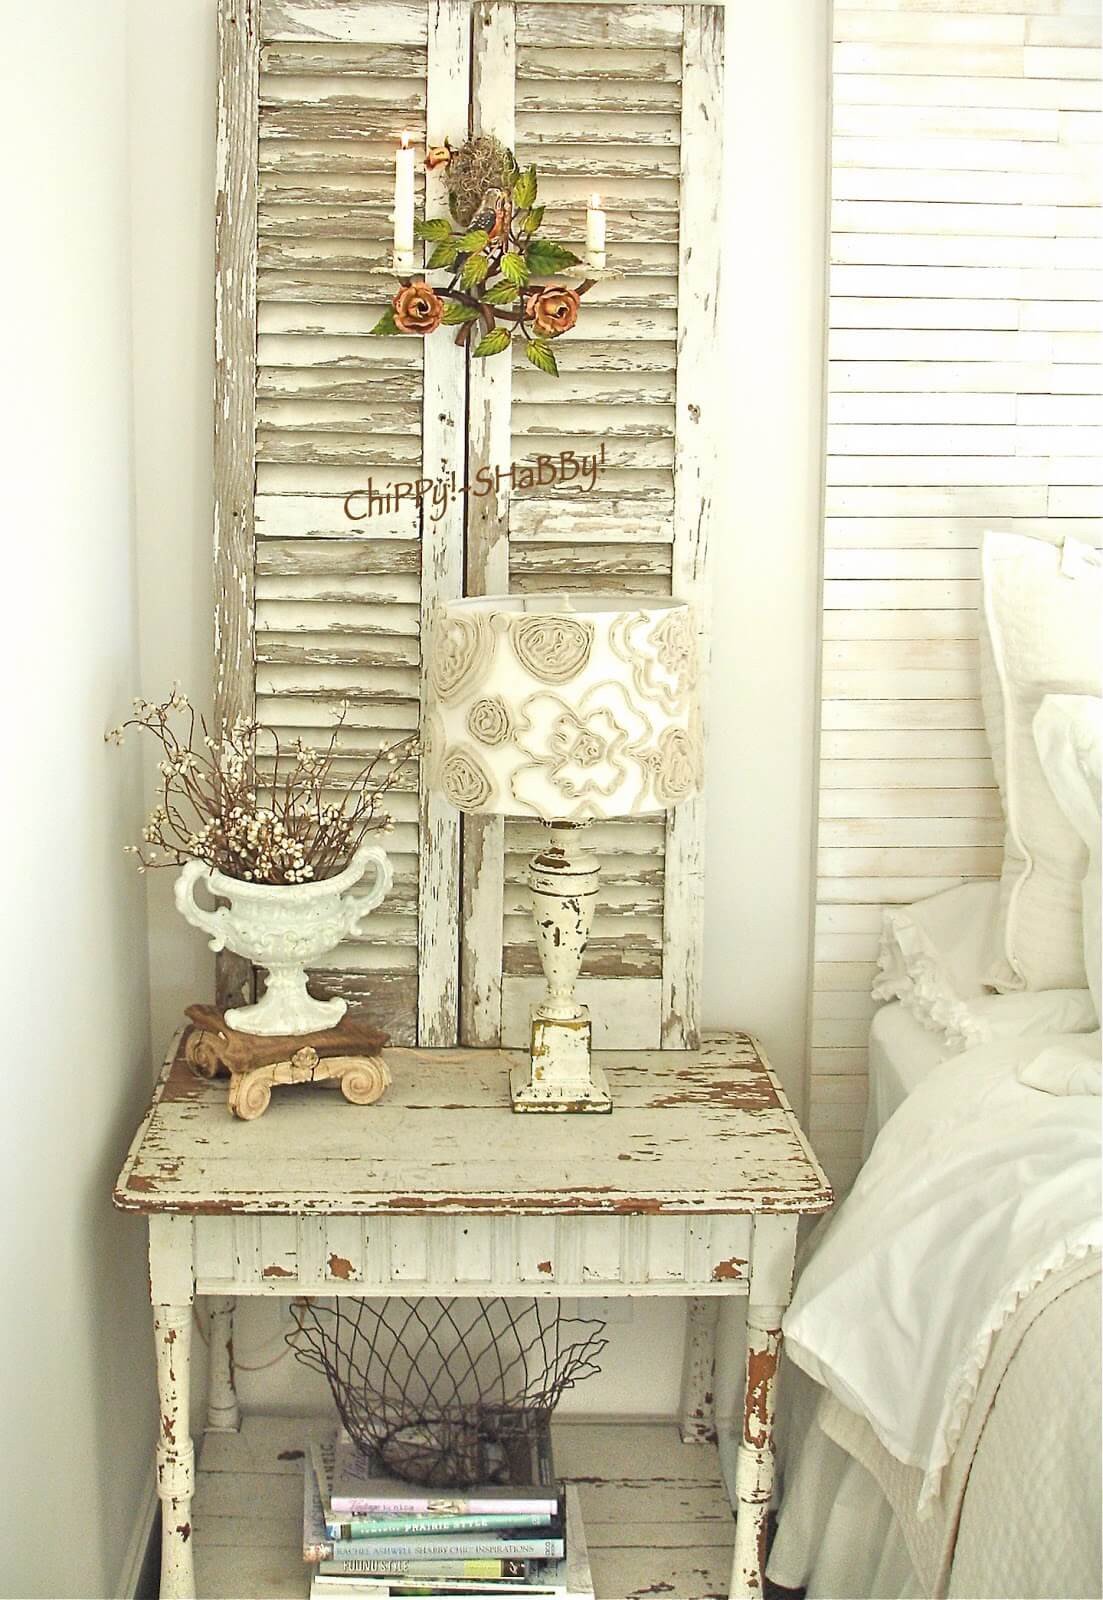 Shabby Chic Wall Decor Ideas Awesome 35 Best Shabby Chic Bedroom Design and Decor Ideas for 2017